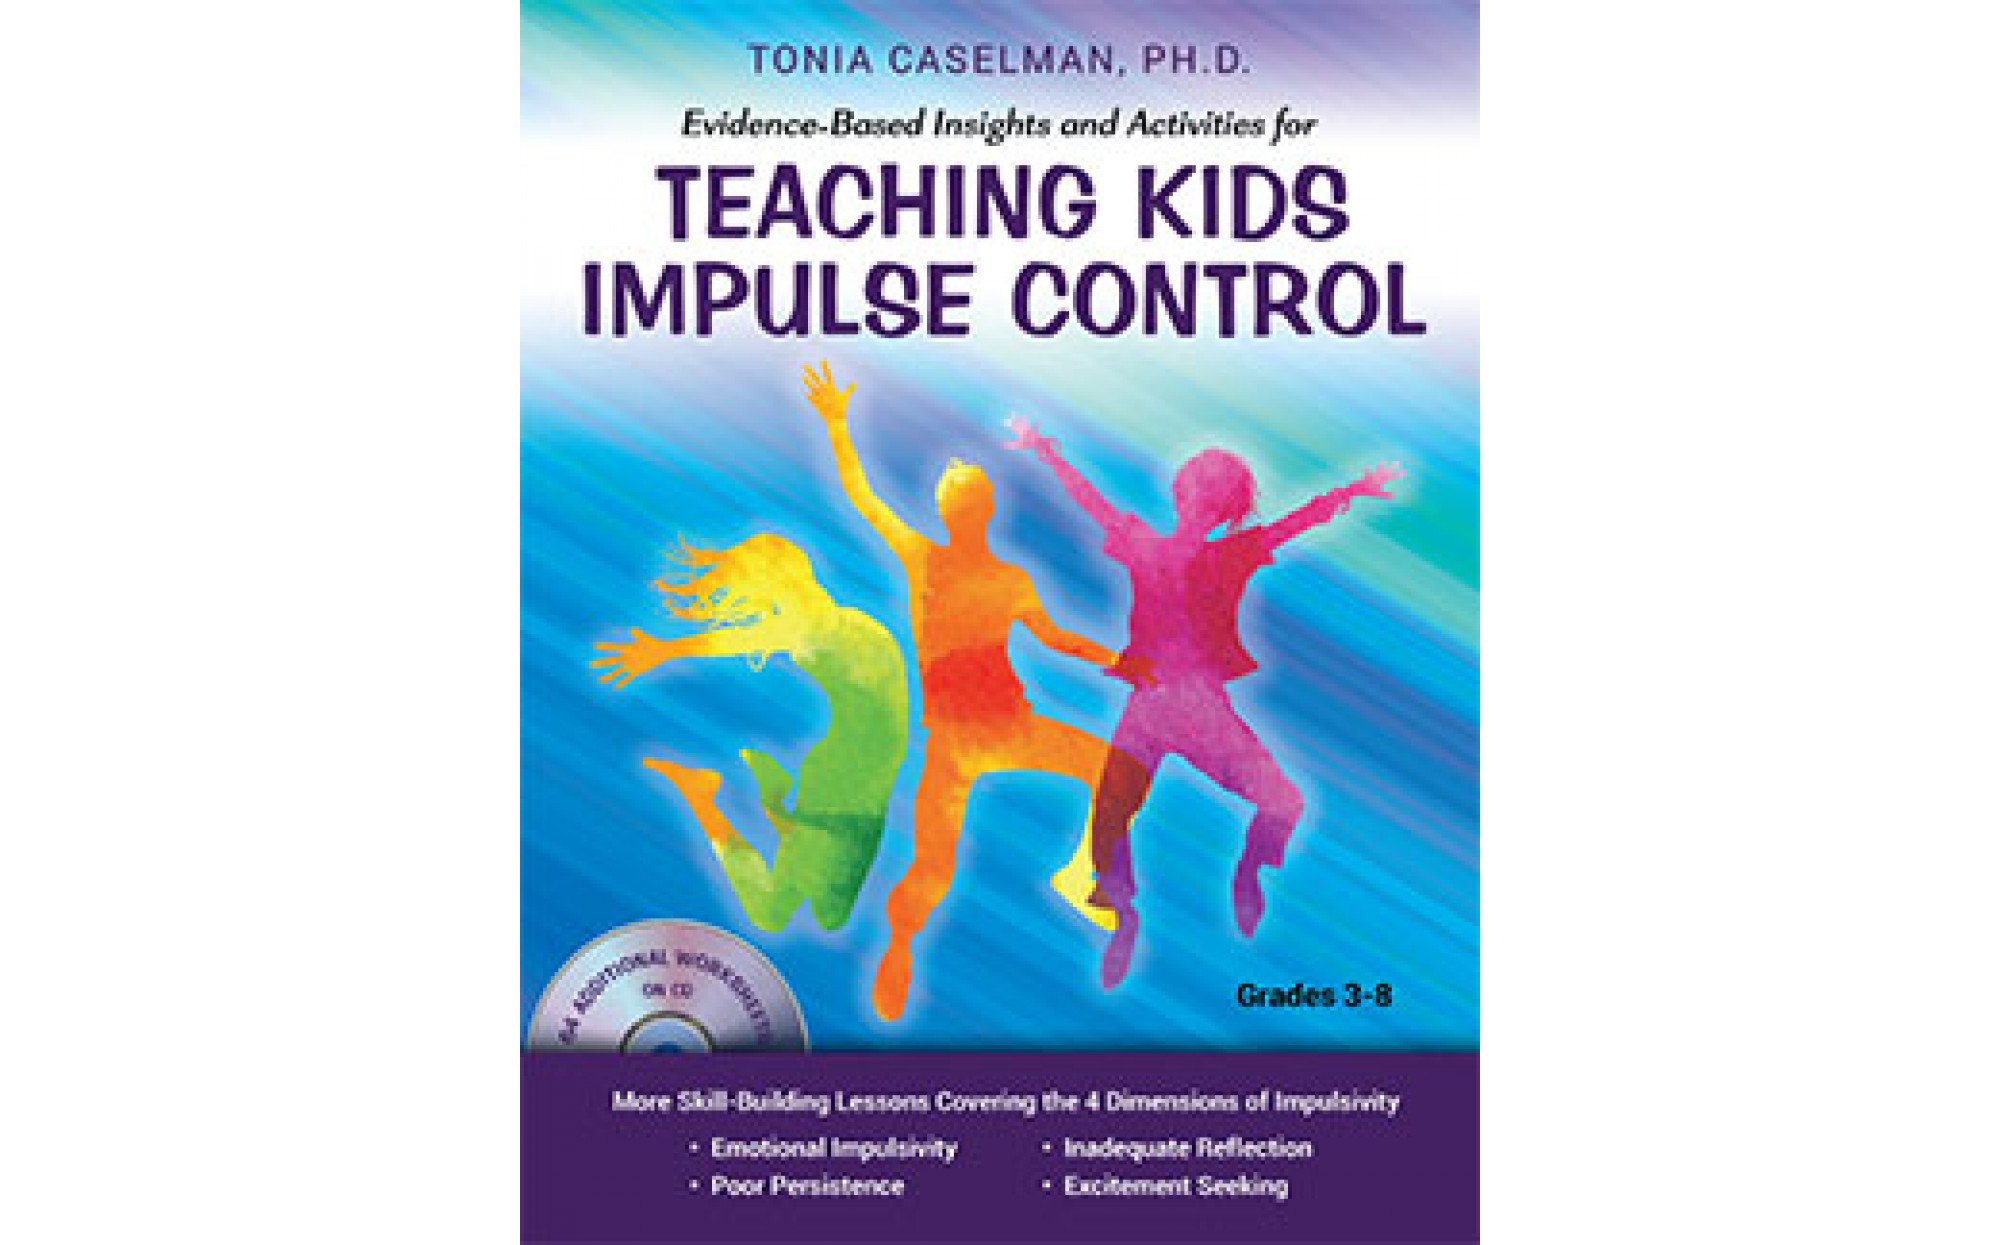 EvidenceBased Insights and Activities for Teaching Kids